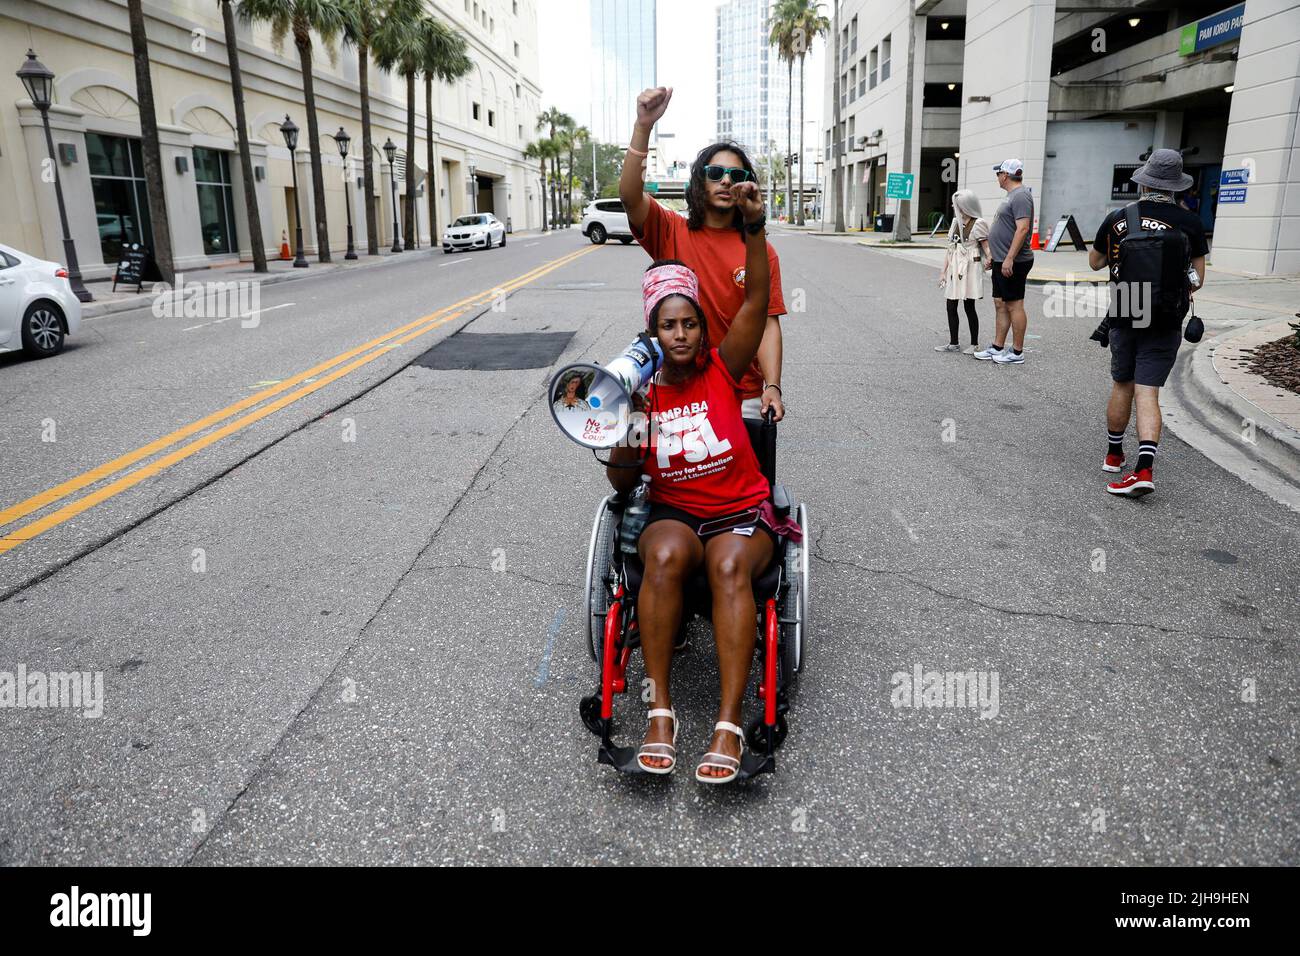 Ruth Beltran, a community activist, leads an abortion rights protest outside the venue of a summit by the conservative group 'Moms For Liberty' in Tampa, Florida, U.S. July 16, 2022.  REUTERS/Octavio Jones Stock Photo